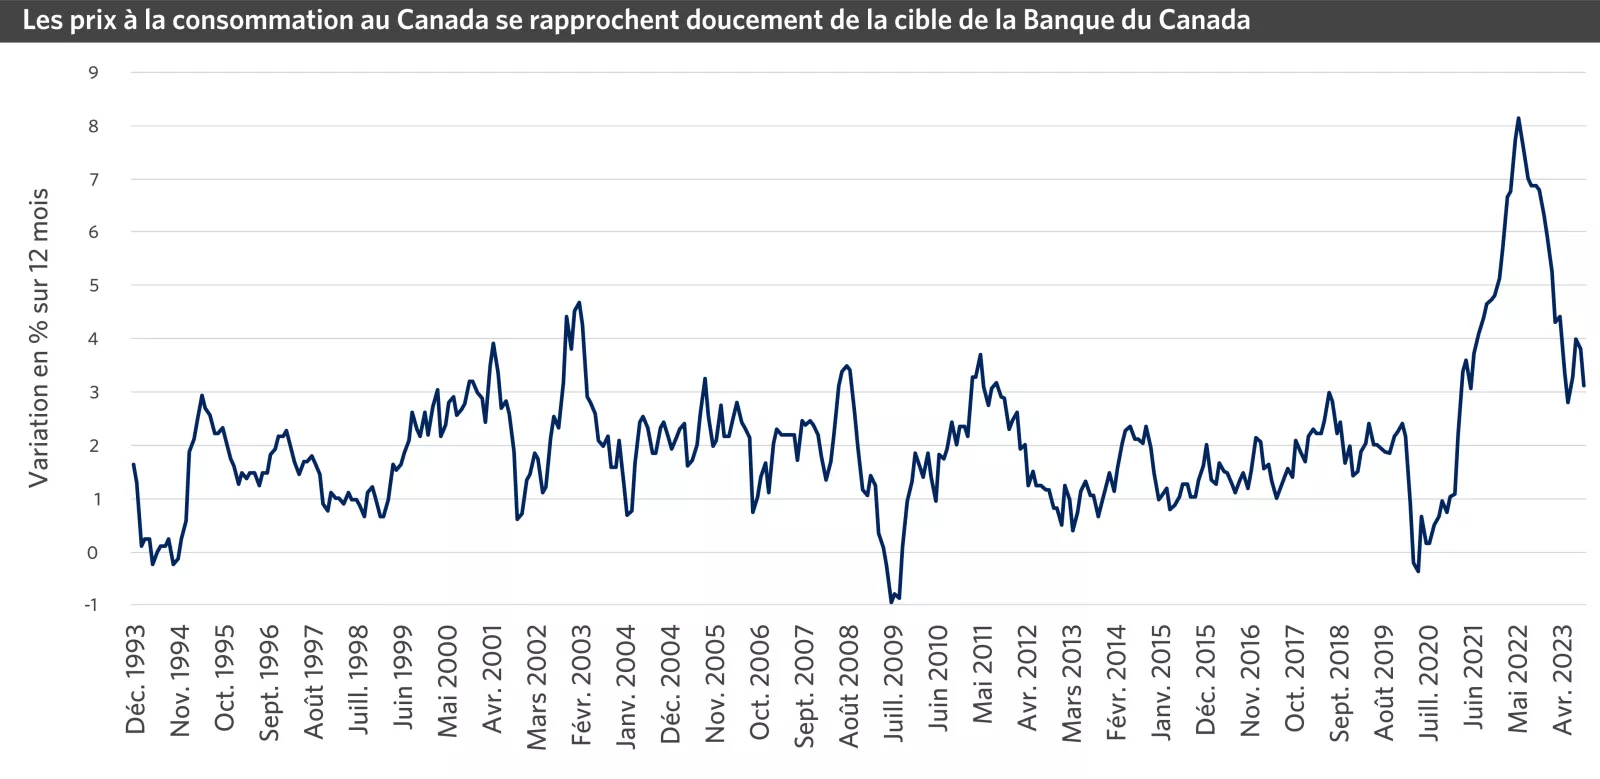 Chart image showing Domestic Consumer Prices have Moderated toward the Bank of Canada's Target